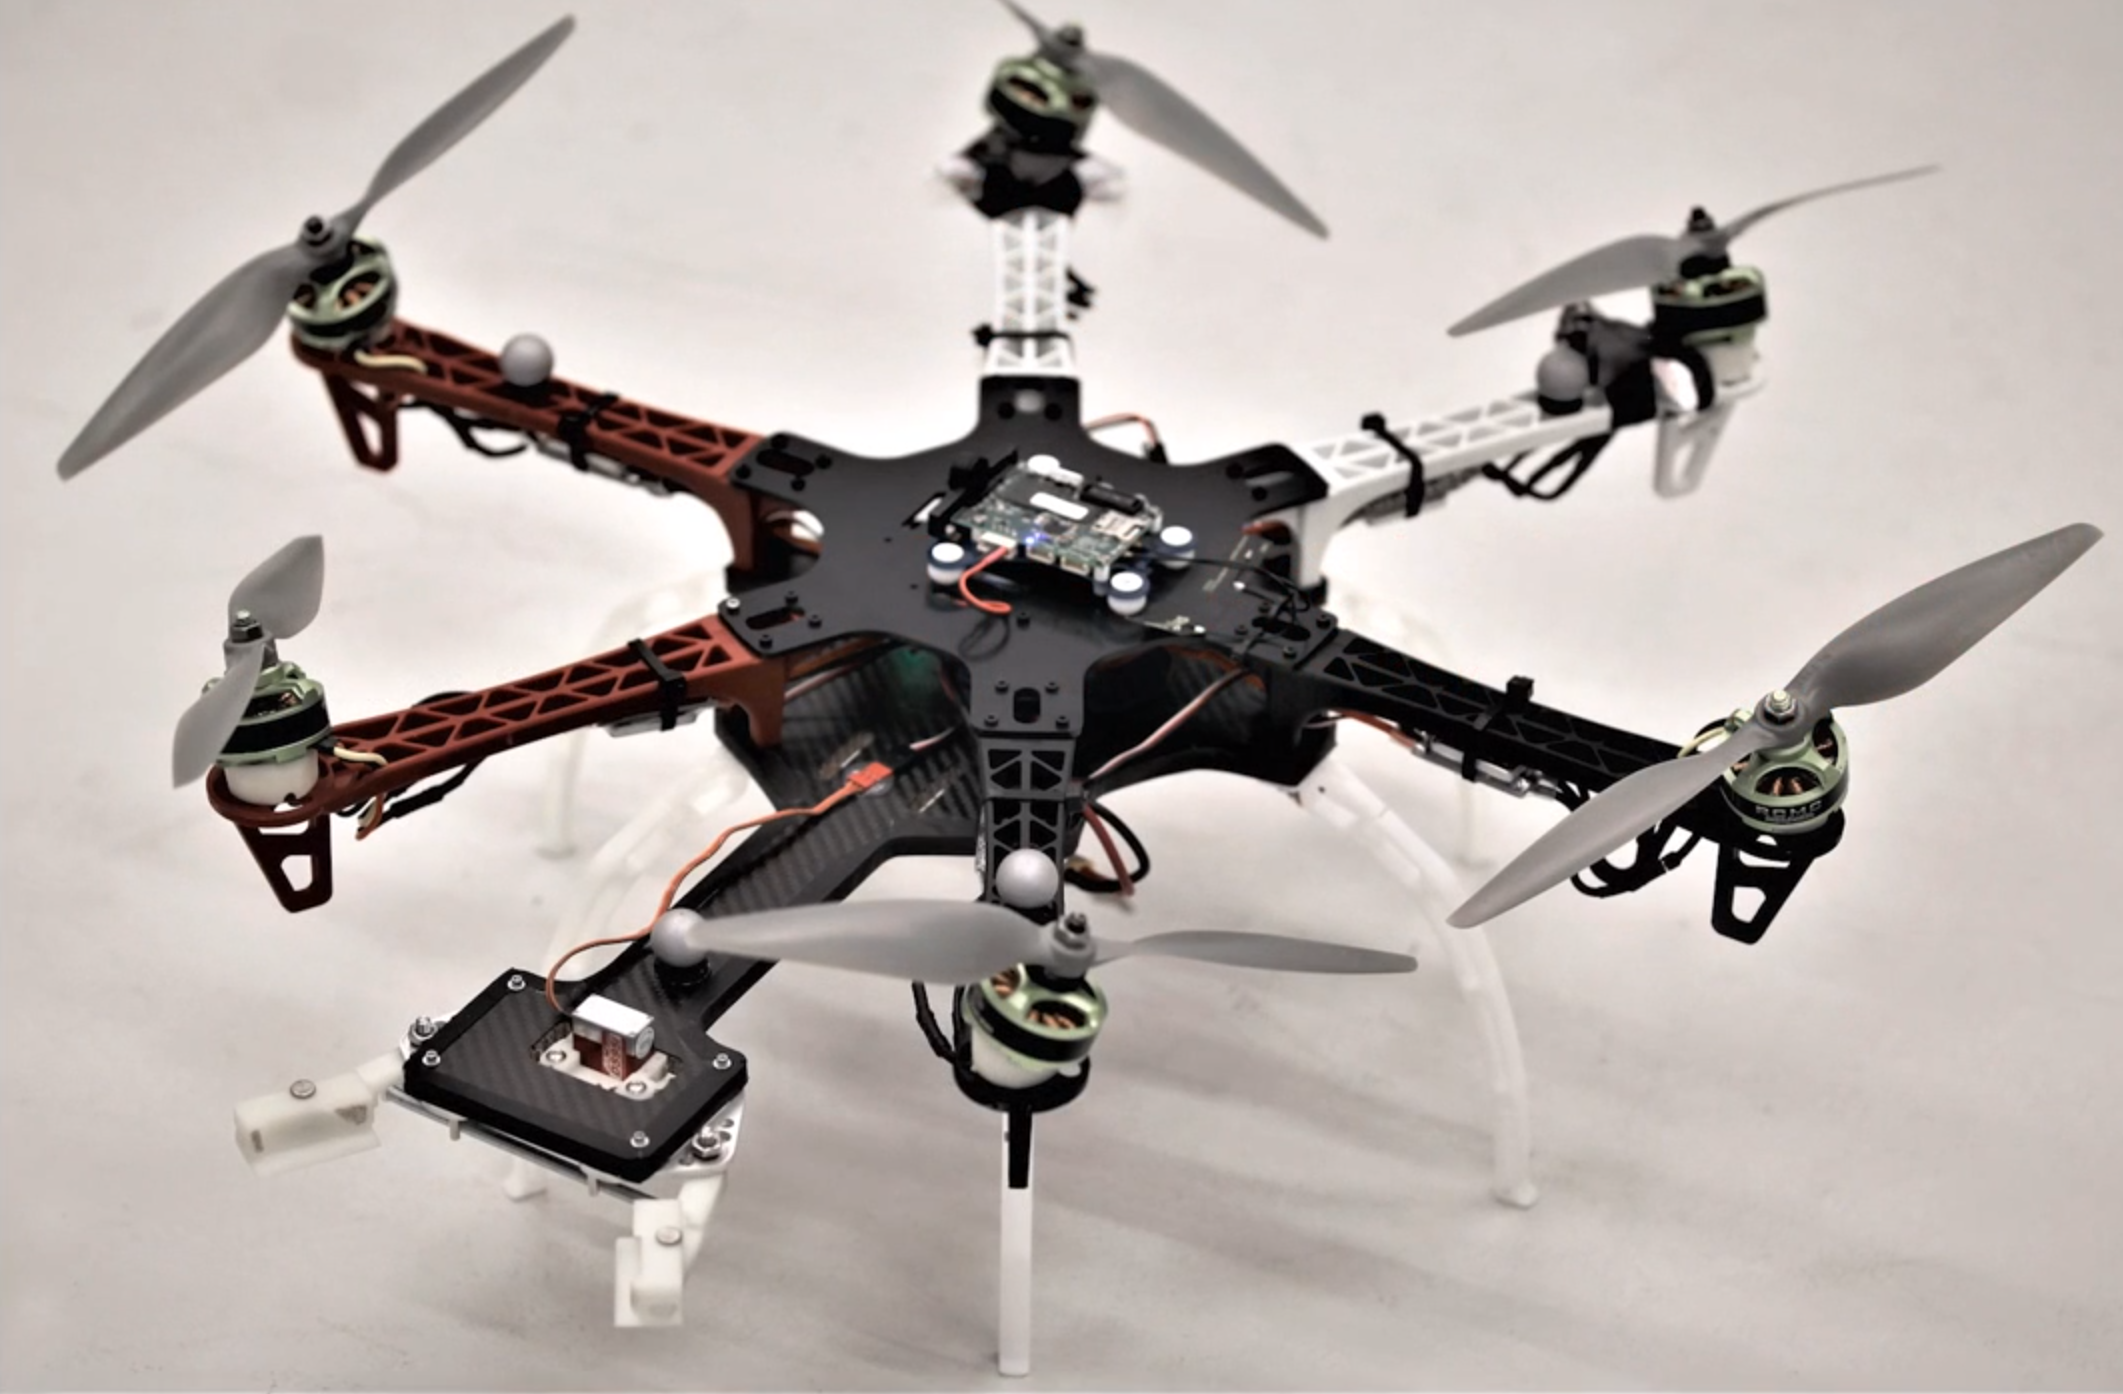 Agile Plate Transport with a Hexacopter with Canted Motors